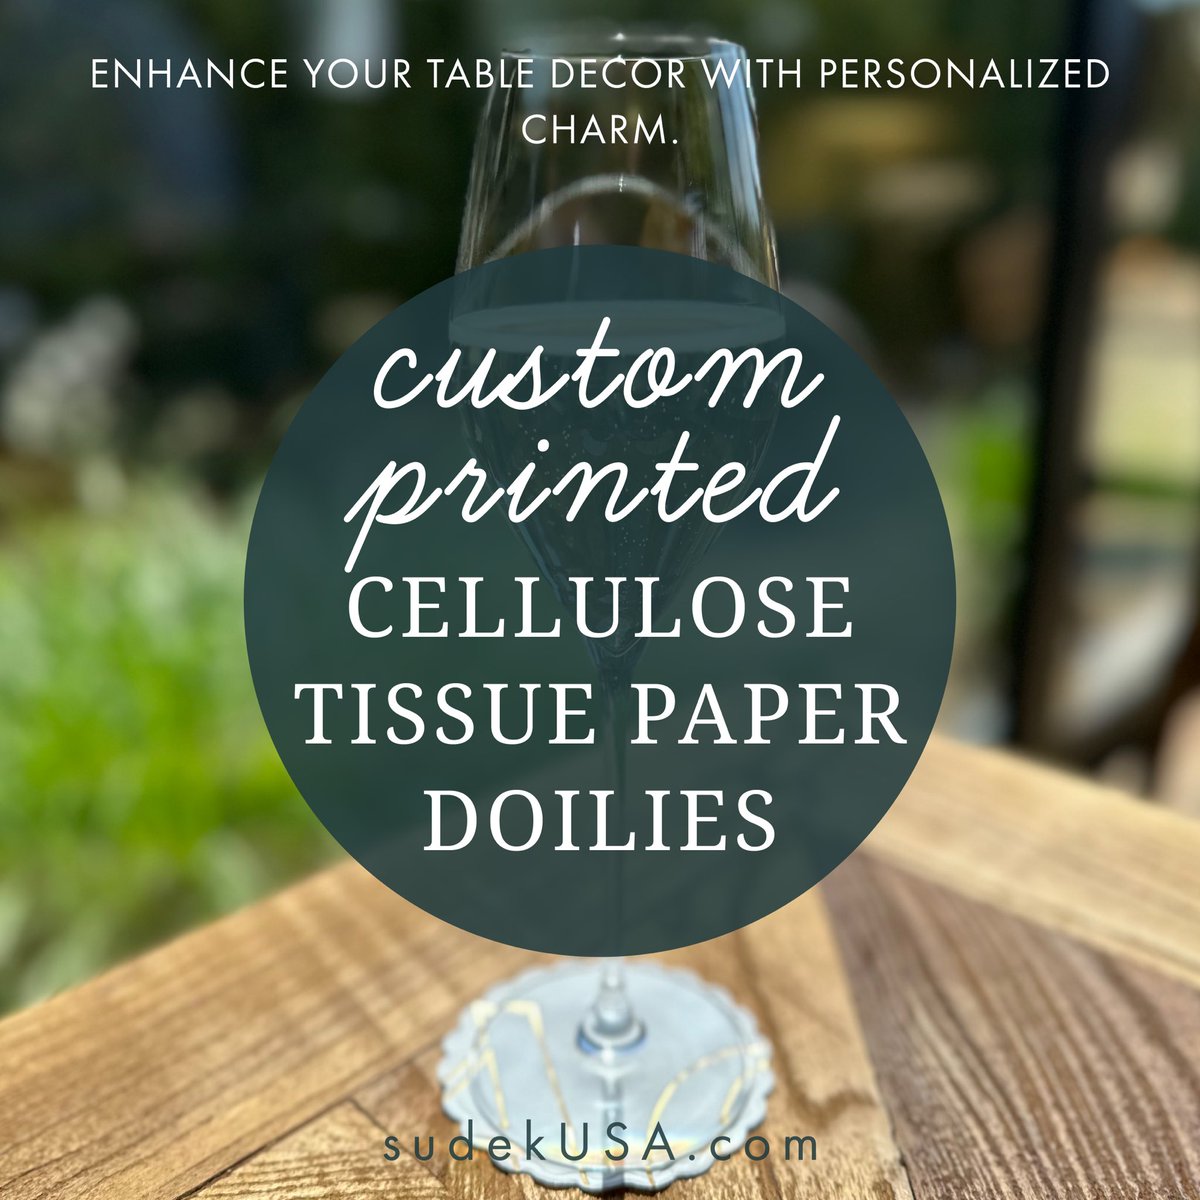 Make every table setting a work of art with our custom printed cellulose tissue paper doilies. These intricately designed doilies add a touch of elegance and personality to any dining experience🍸
#CustomDoilies #TableArt #Personalizedproducts #sudekusa
#customizedstyle